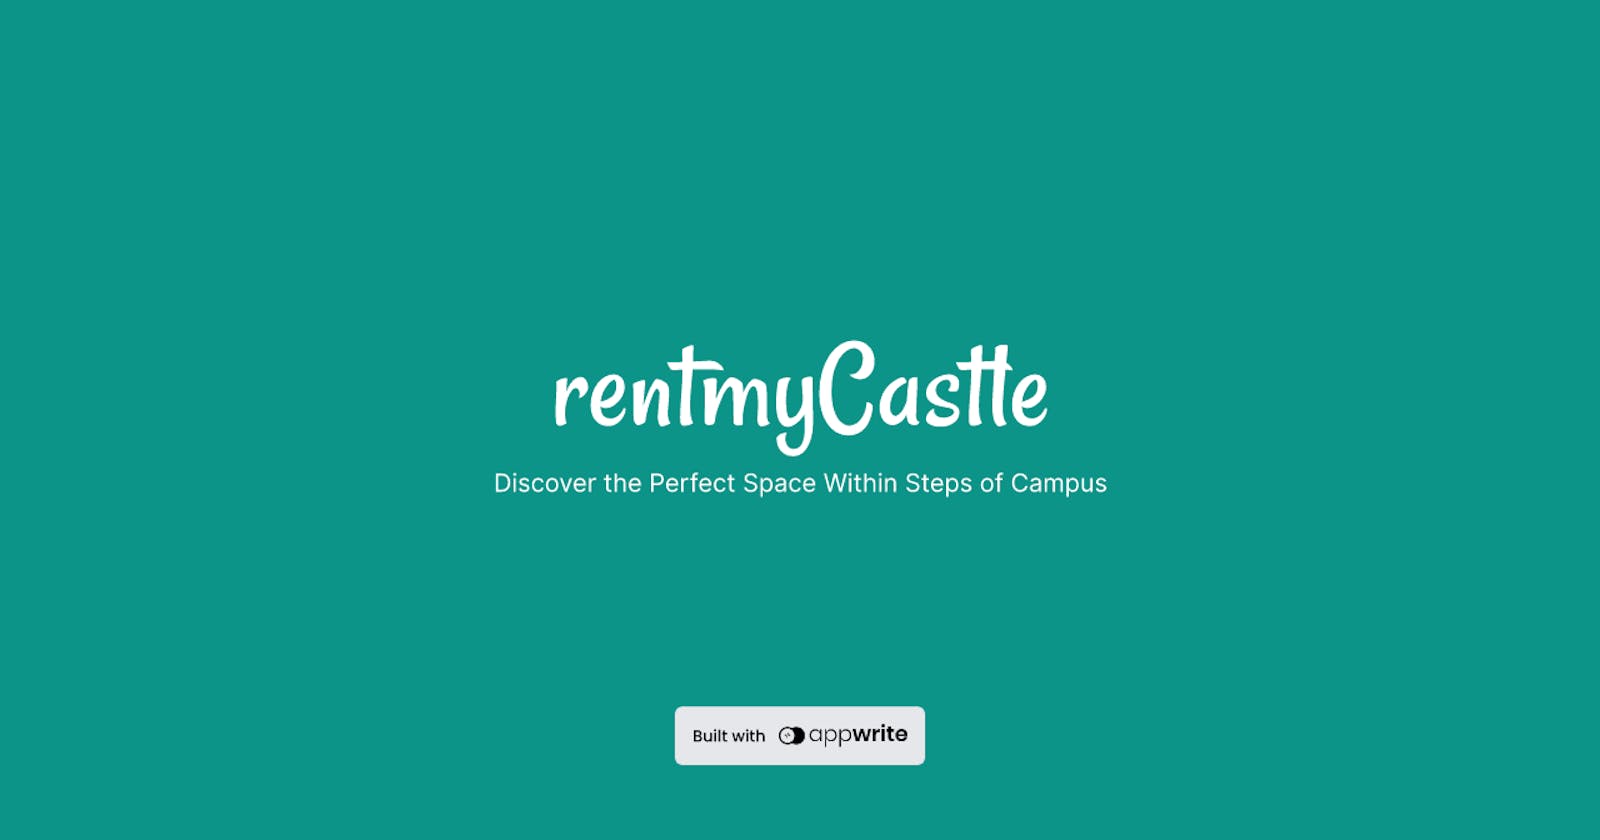 Discover the perfect space within steps of campus with rentmyCastle